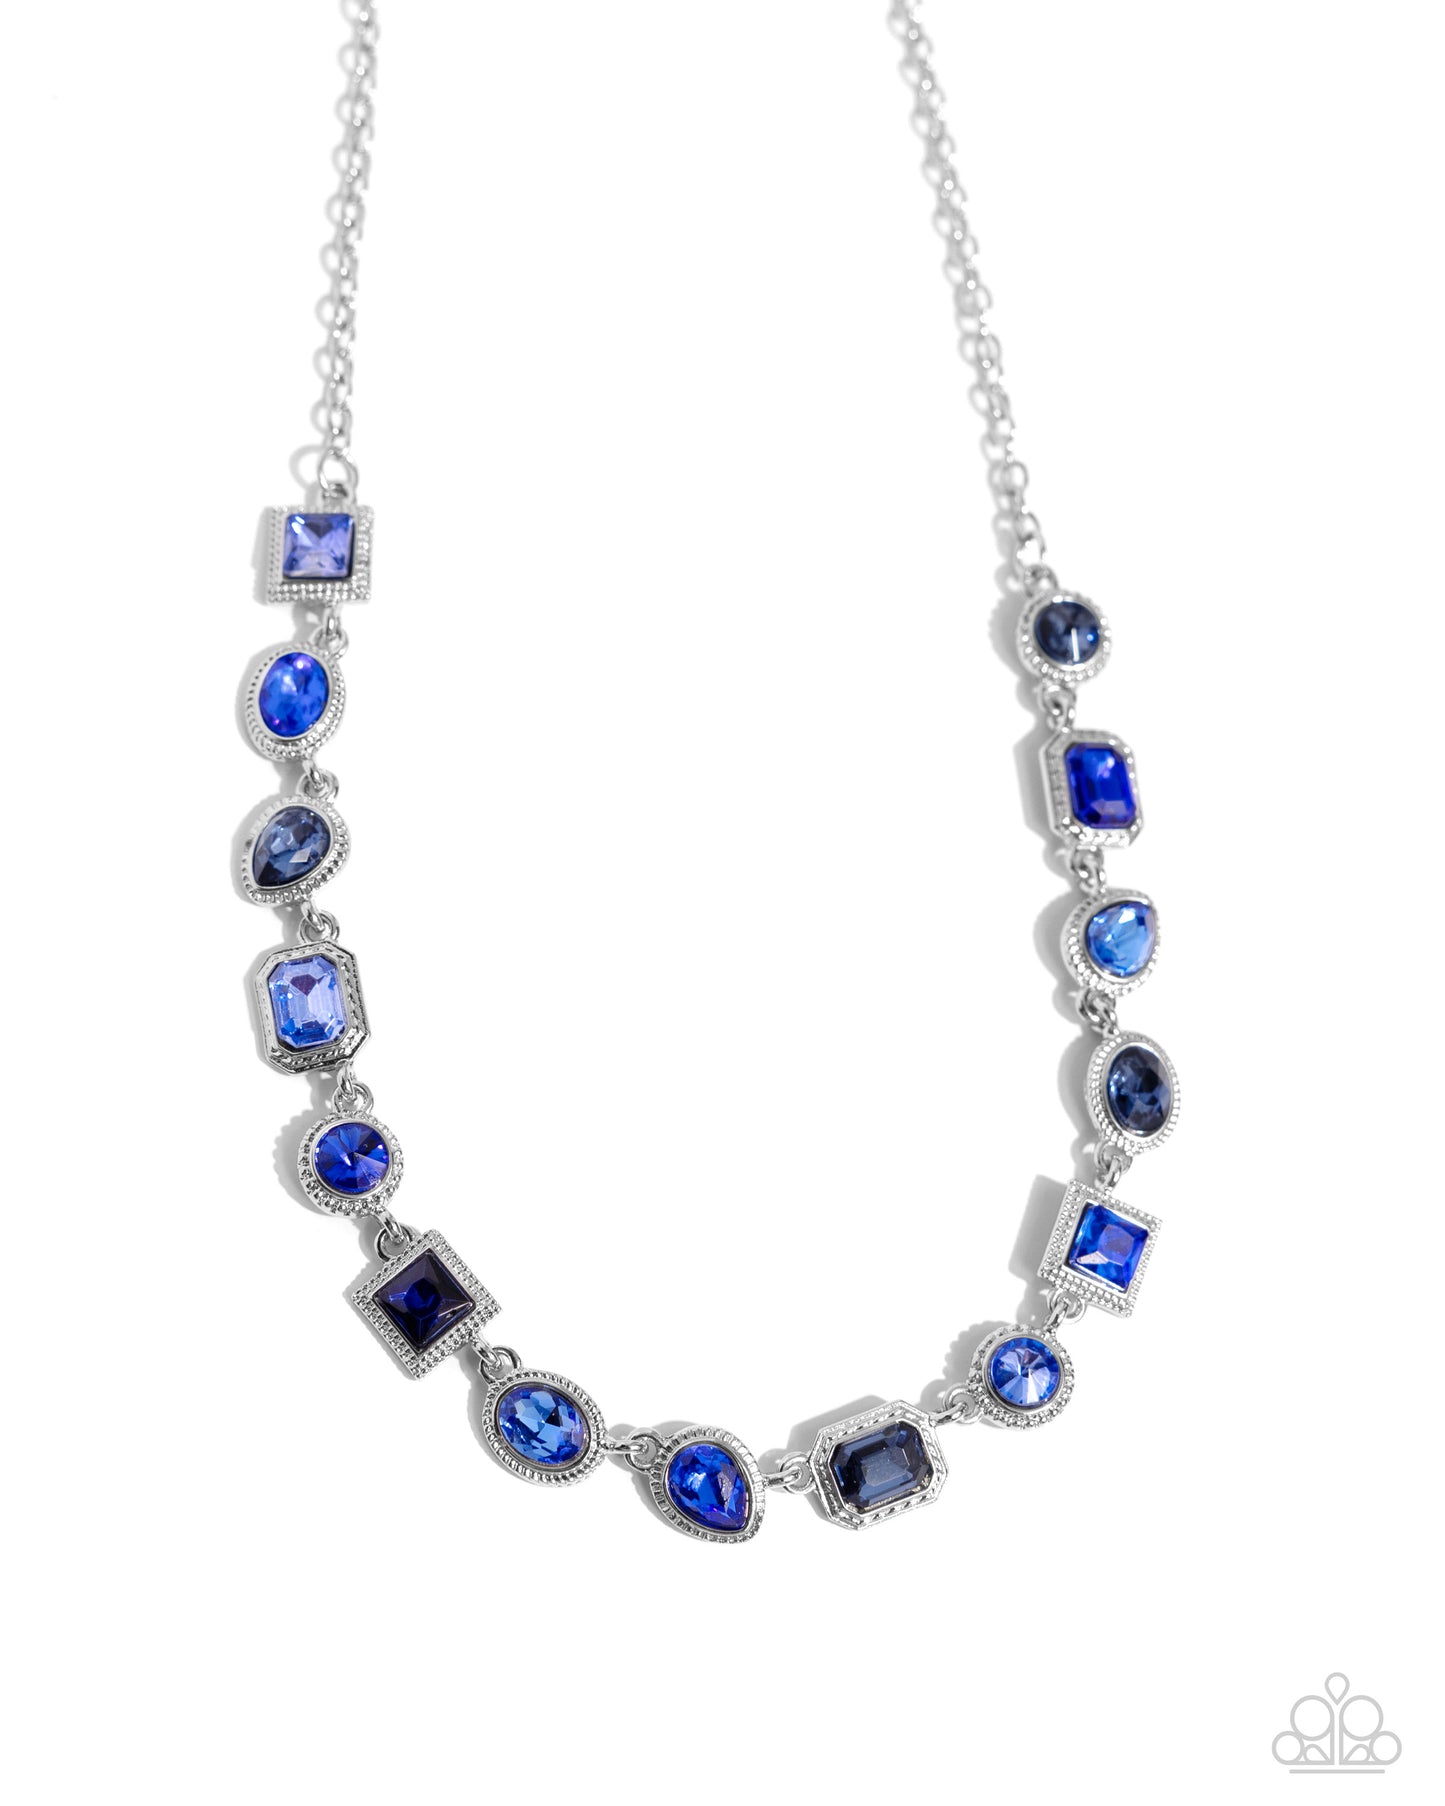 Gallery Glam - Blue Shaped Gems Paparazzi Necklace & matching earrings